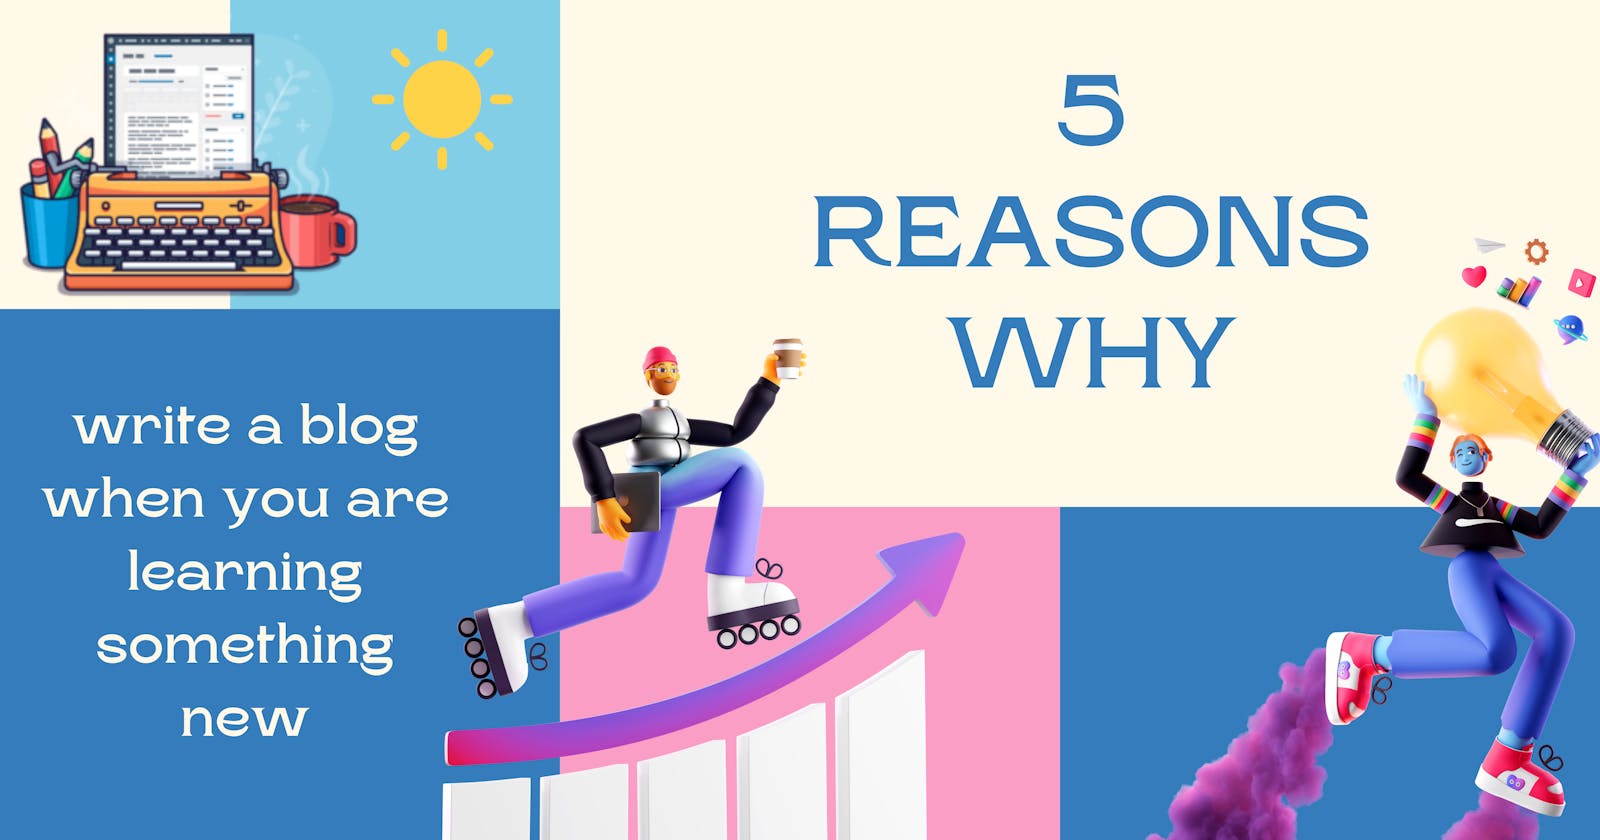 Top 5 reasons to write a blog when you are learning something new